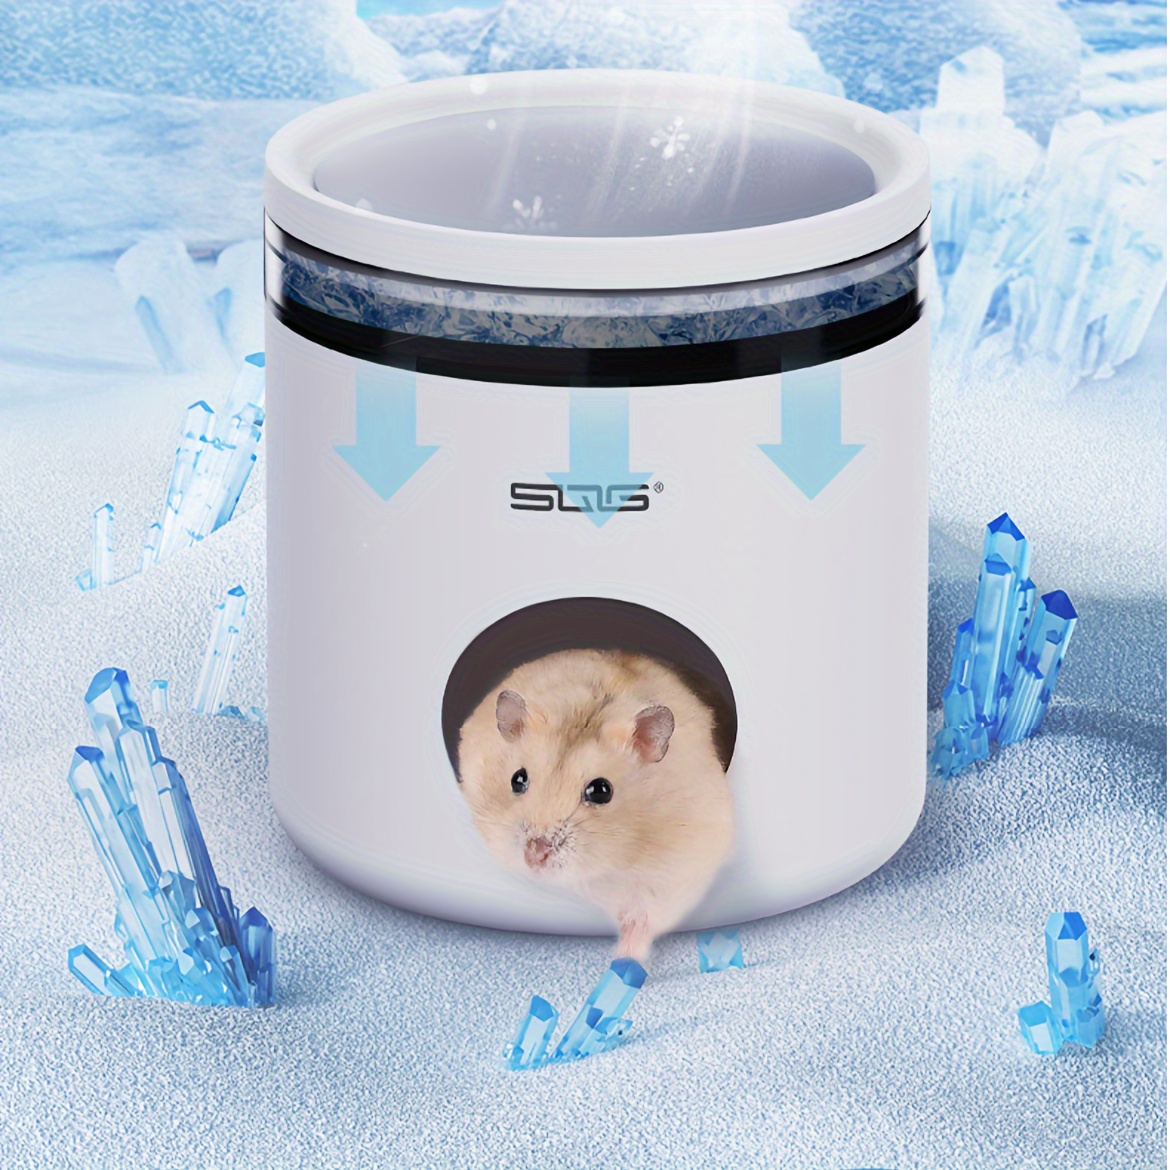 

Cooling Hamster Hideaway - Summer Chill Nest For Small Pets, Durable Plastic Guinea Pig & Hamster Shelter House Hamster Hideout Hamster House